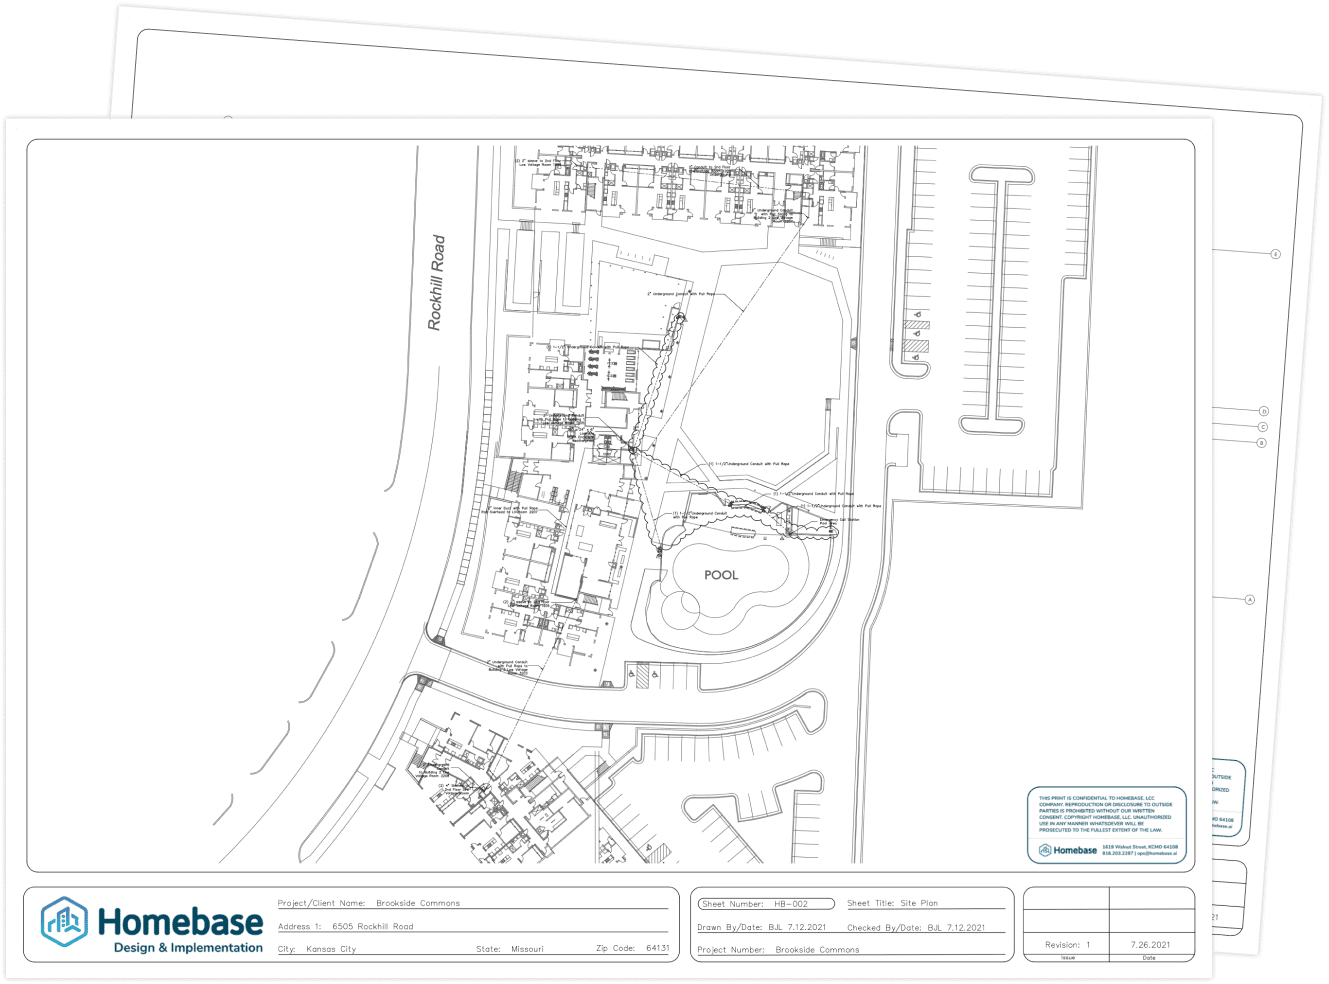 The CAD designs for the Brookside Commons smart community.